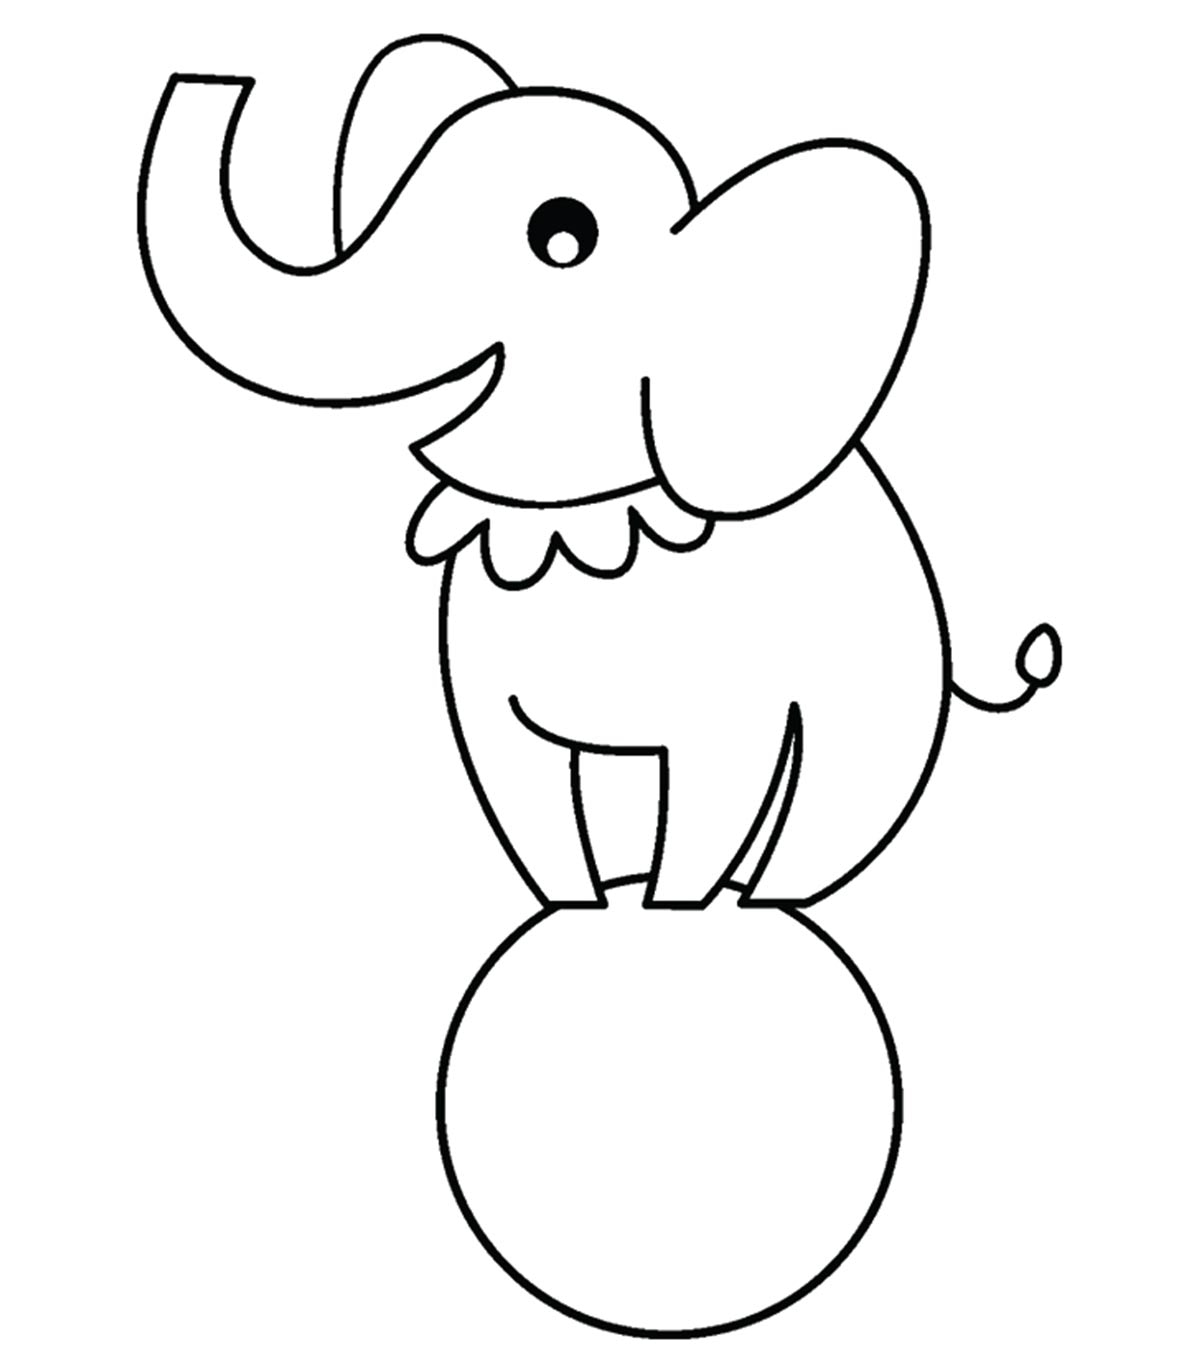 Top 25 Preschool Coloring Pages For Your Little Ones